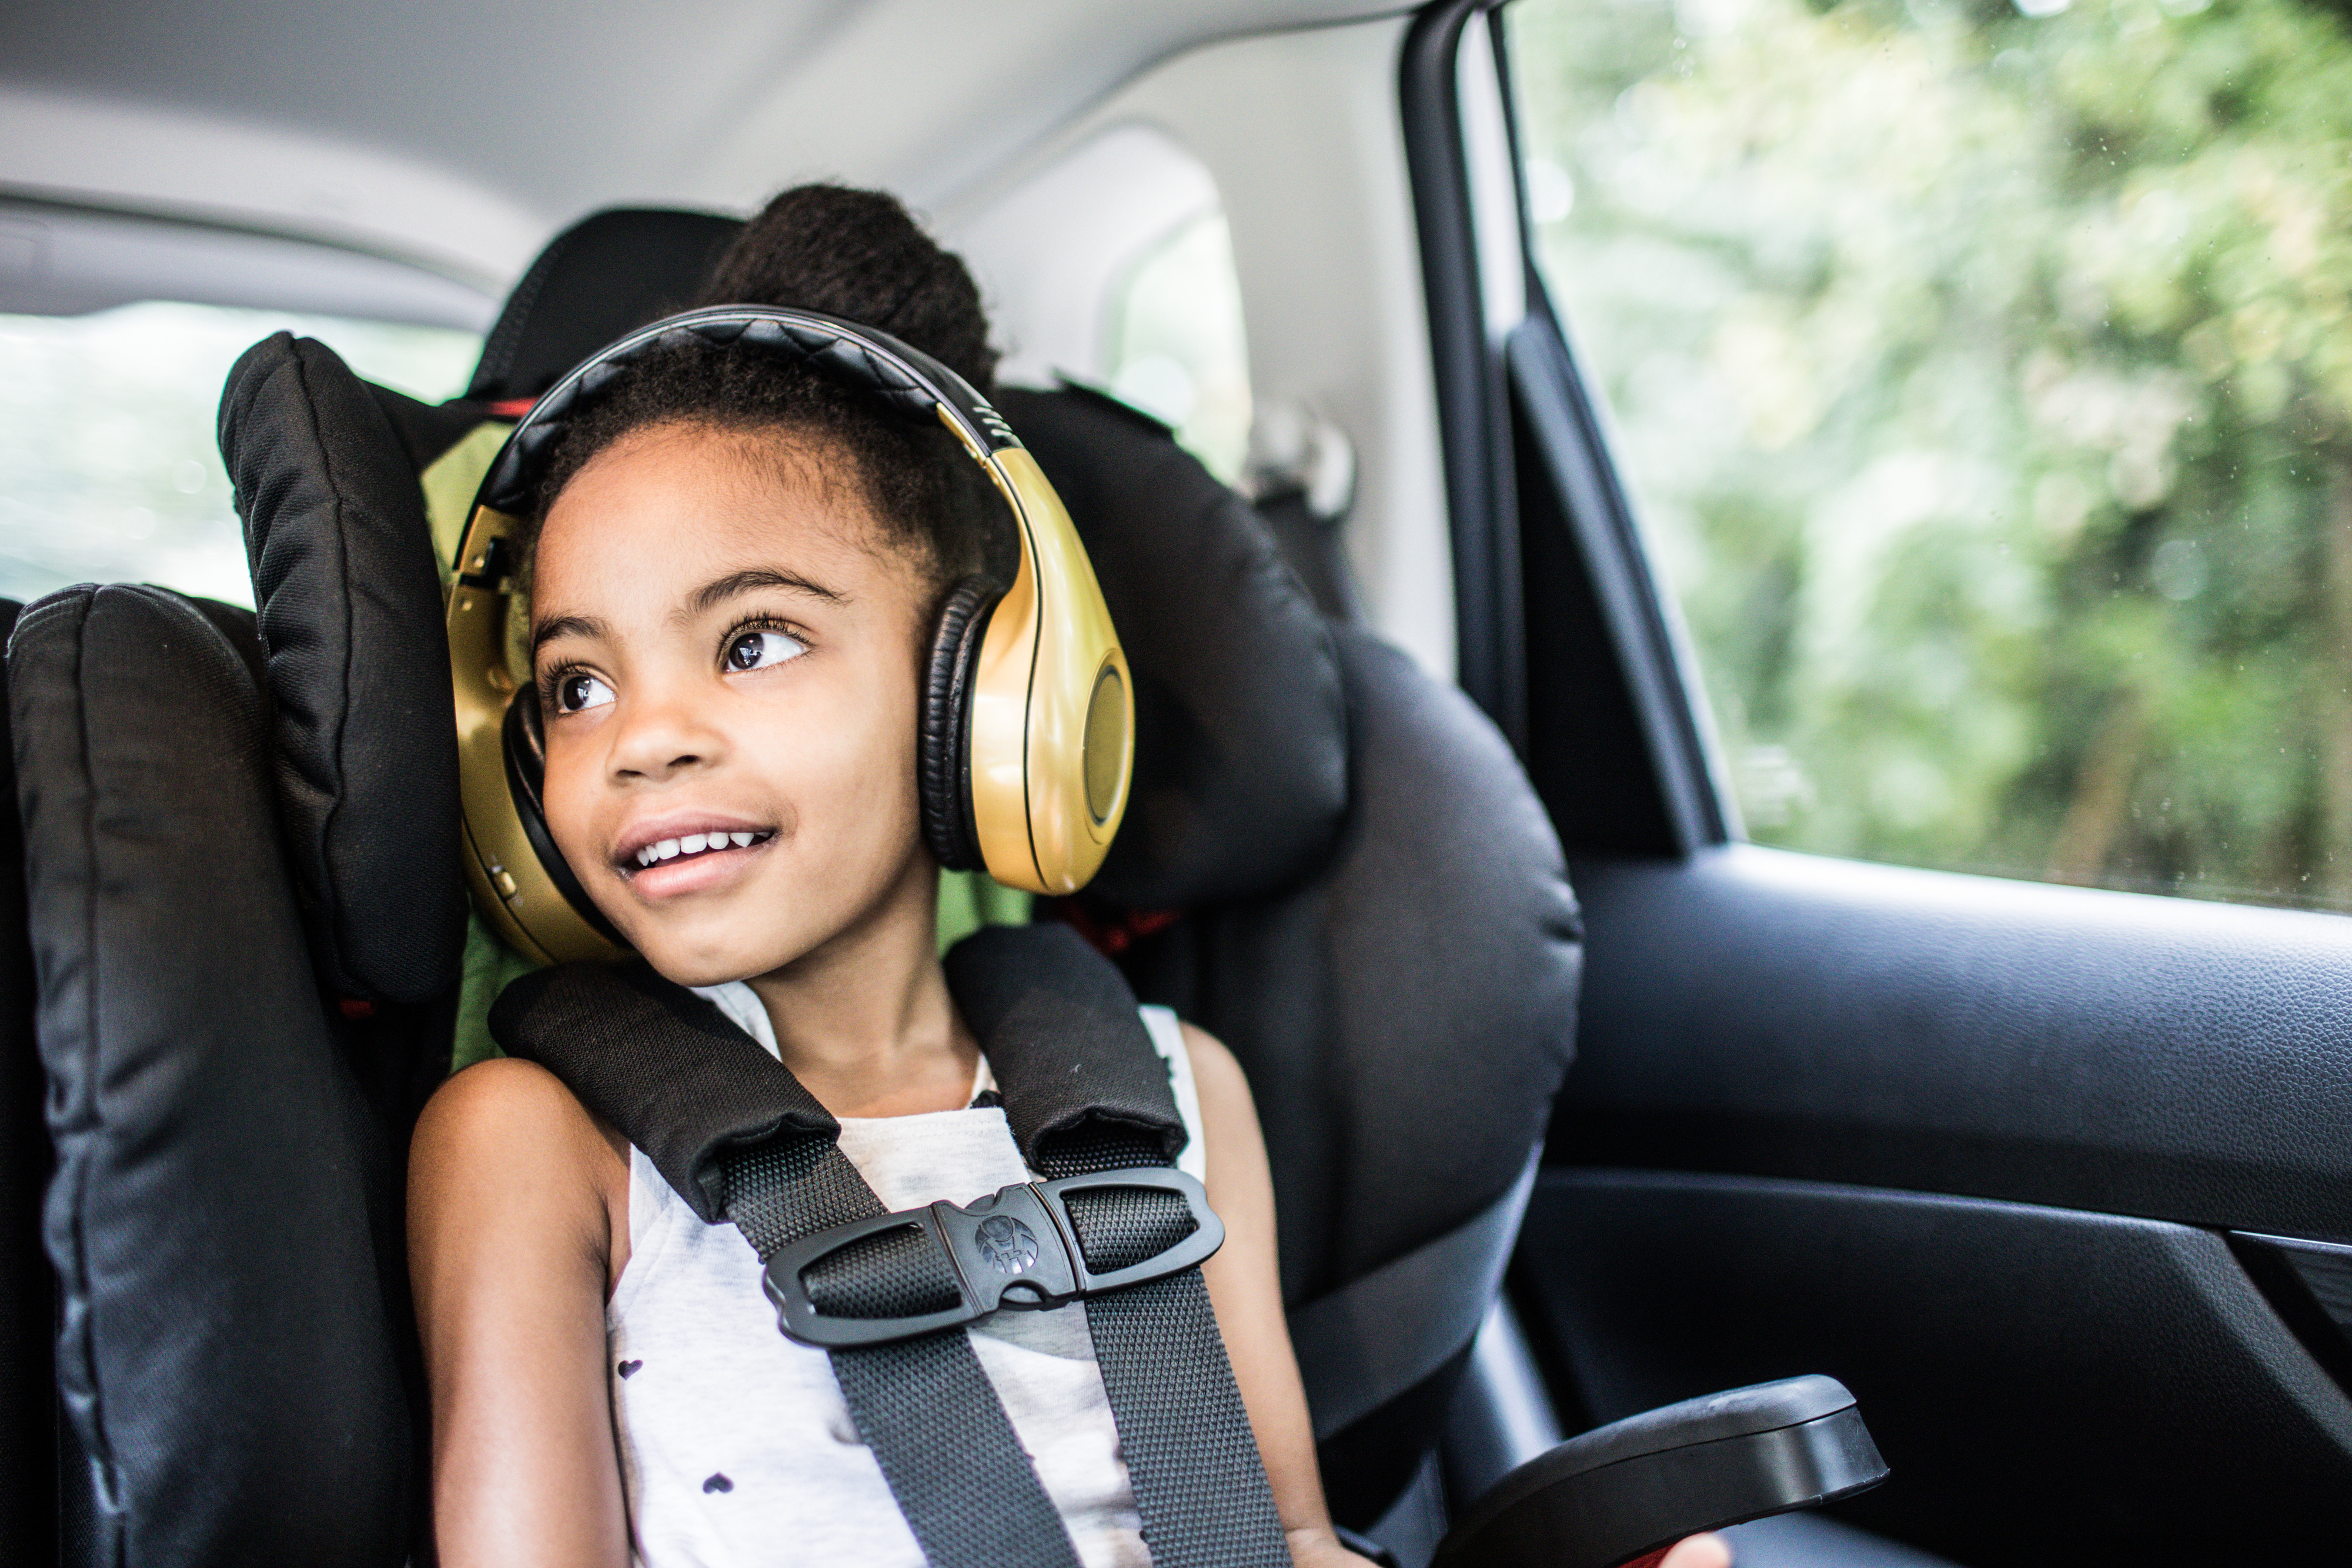 Young child in car seat wearing headphones, looking out window, possibly during a commute